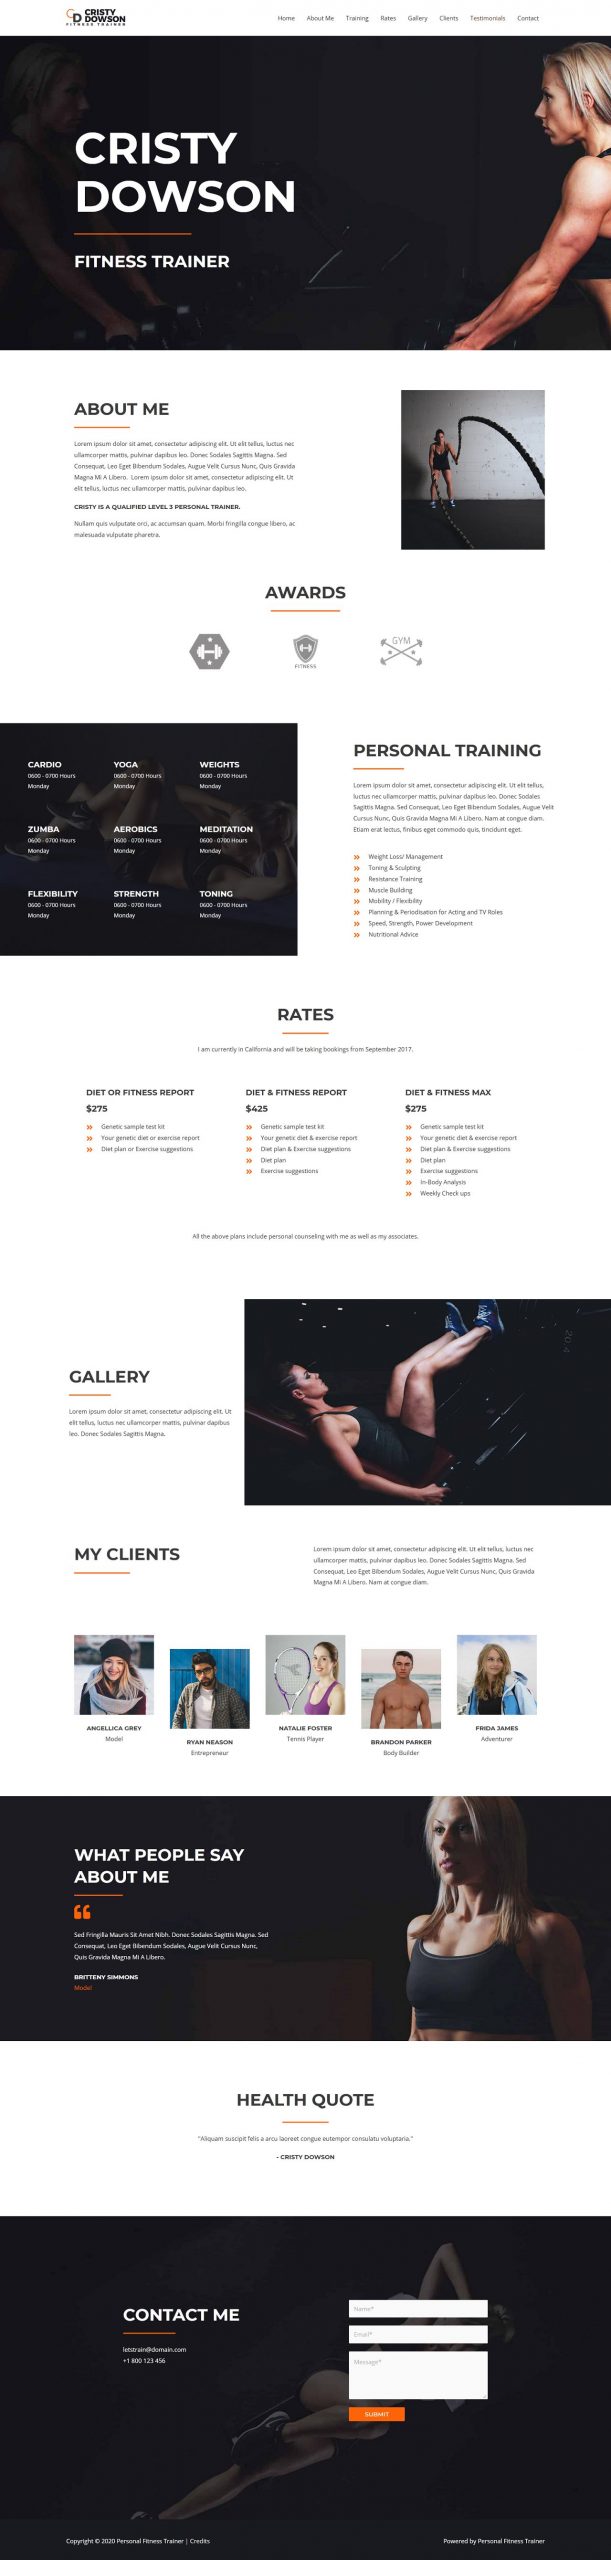 Fagowi.com Website Design Templates For Personal Trainer Female - Home Page Image